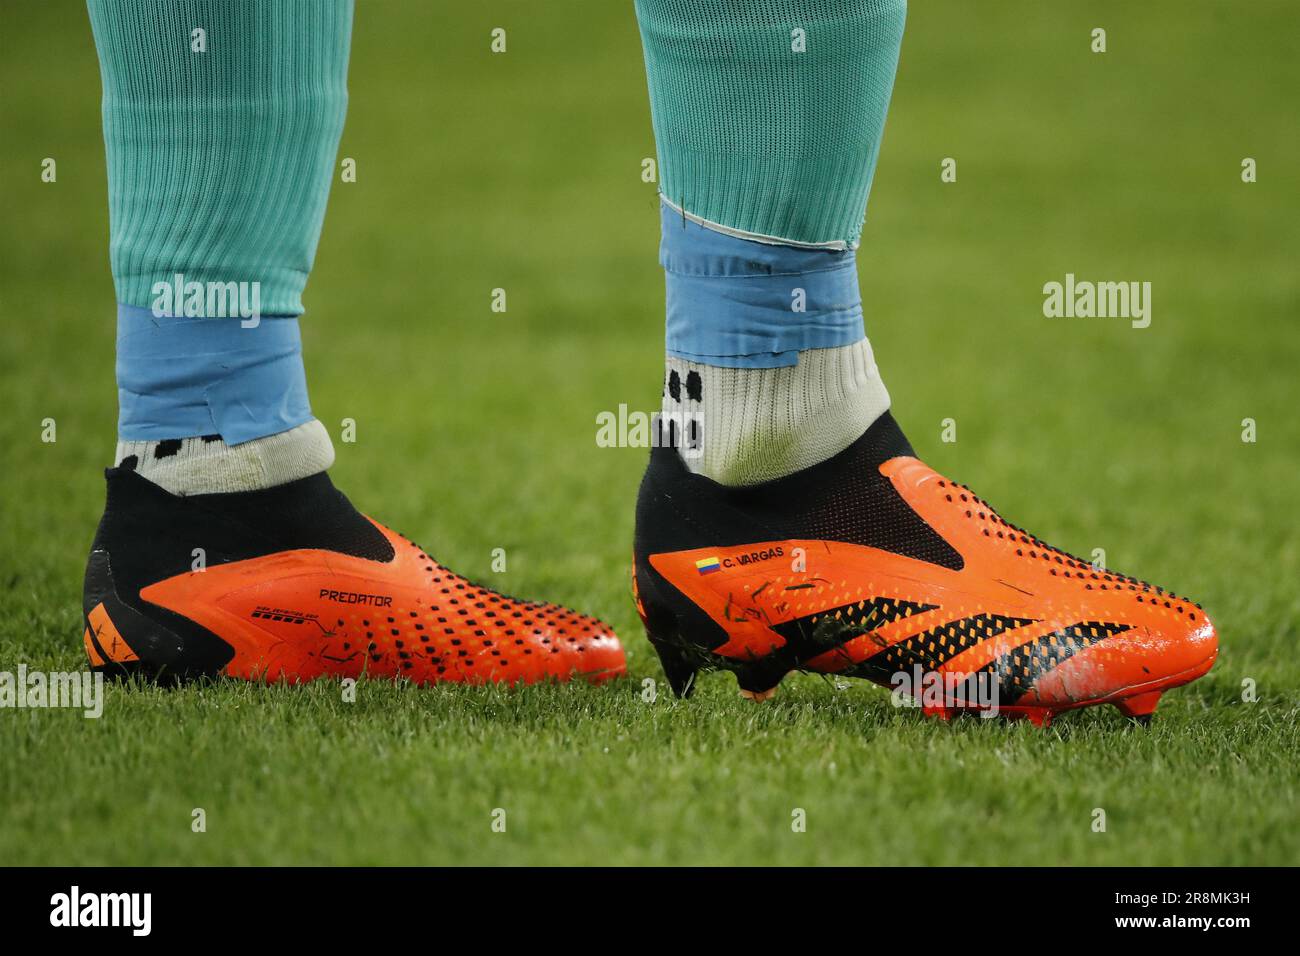 GELSENKIRCHEN - 20/06/2023, Adidas football boots Colombia goalkeeper Camilo Vergas during the friendly international match between Germany and Colombia at the Veltins-Arena on June 20, 2023 in Gelsenkirchen, Germany. AP | Dutch Height | BART STOUTJESDYK Stock Photo